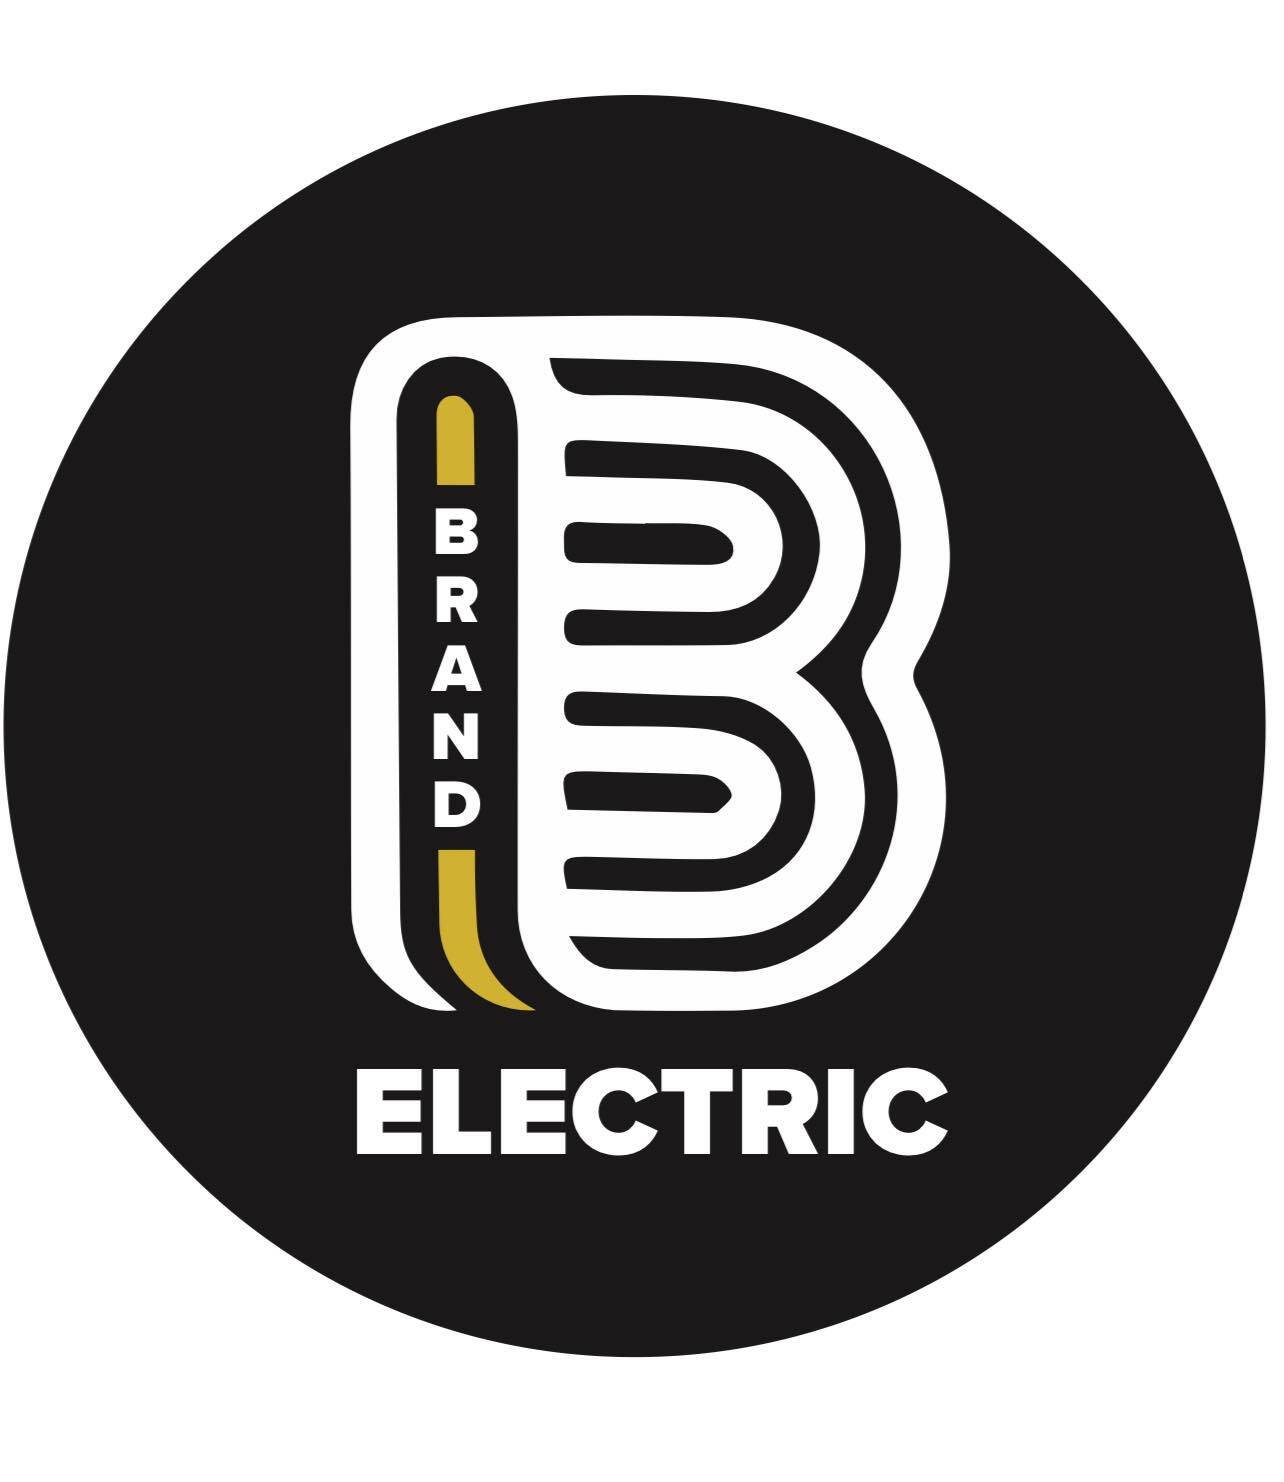 BRAND ELECTRICAL CONTRACTORS LIMITED